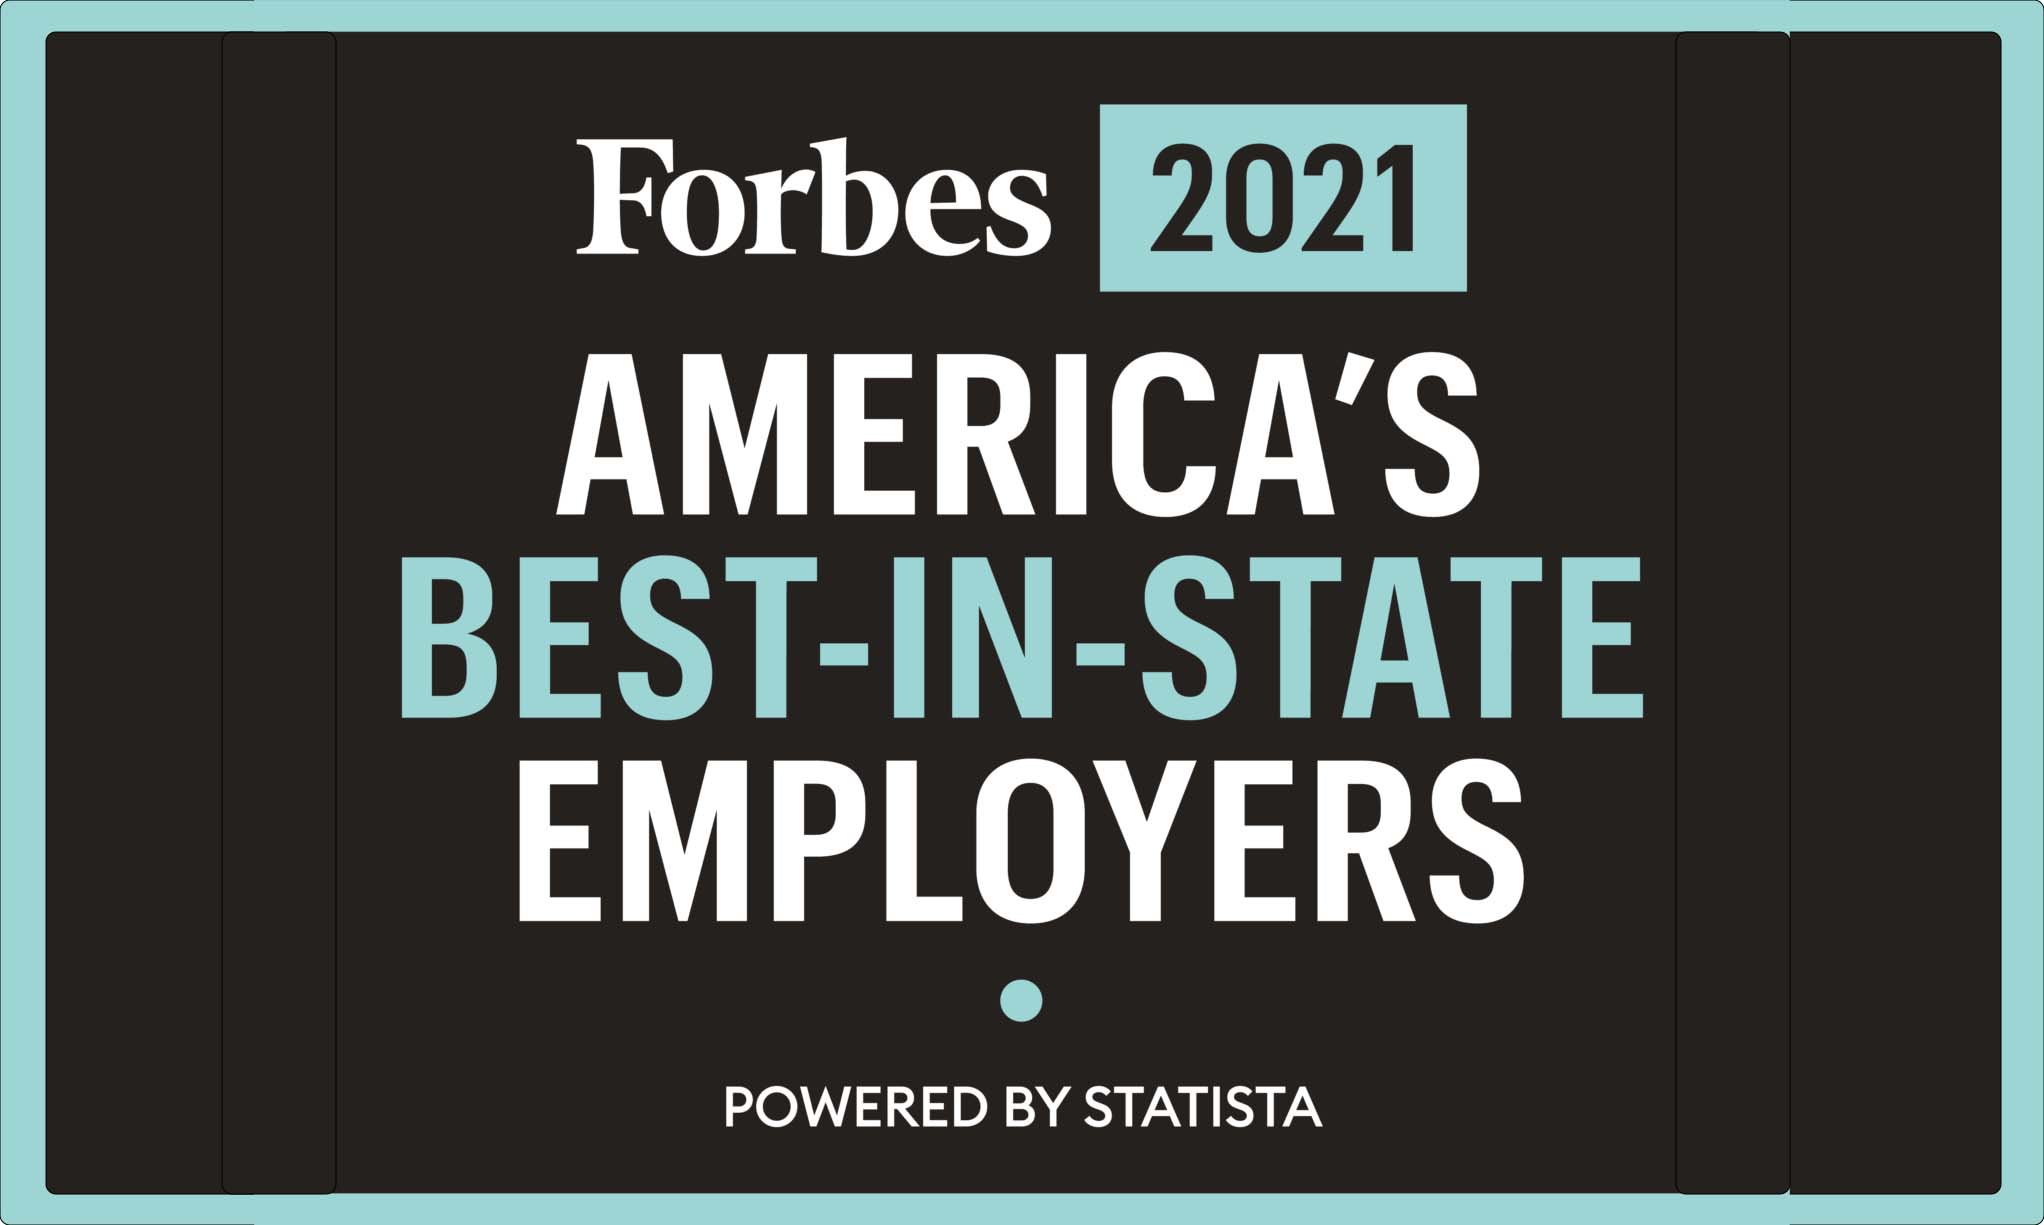 Forbes 2021 America's Best In-State Employers Powered by Statista